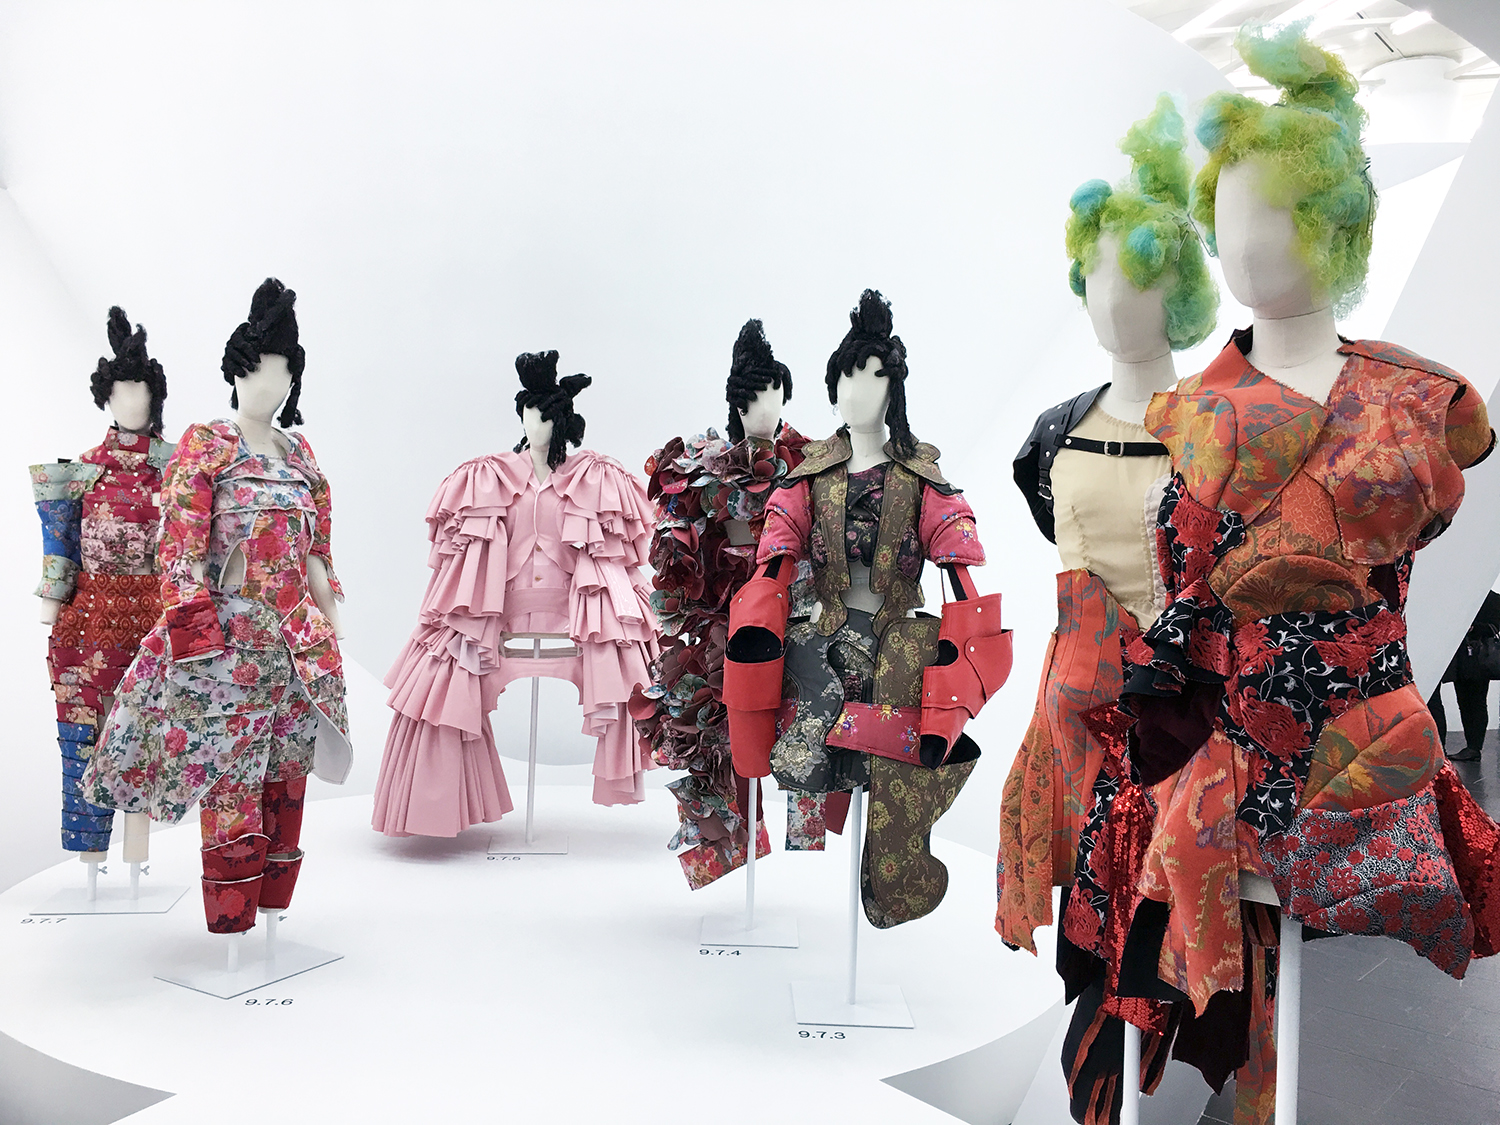 Stylecurated: REI KAWAKUBO / COMME DES GARCONS : ART OF THE IN-BETWEEN ...